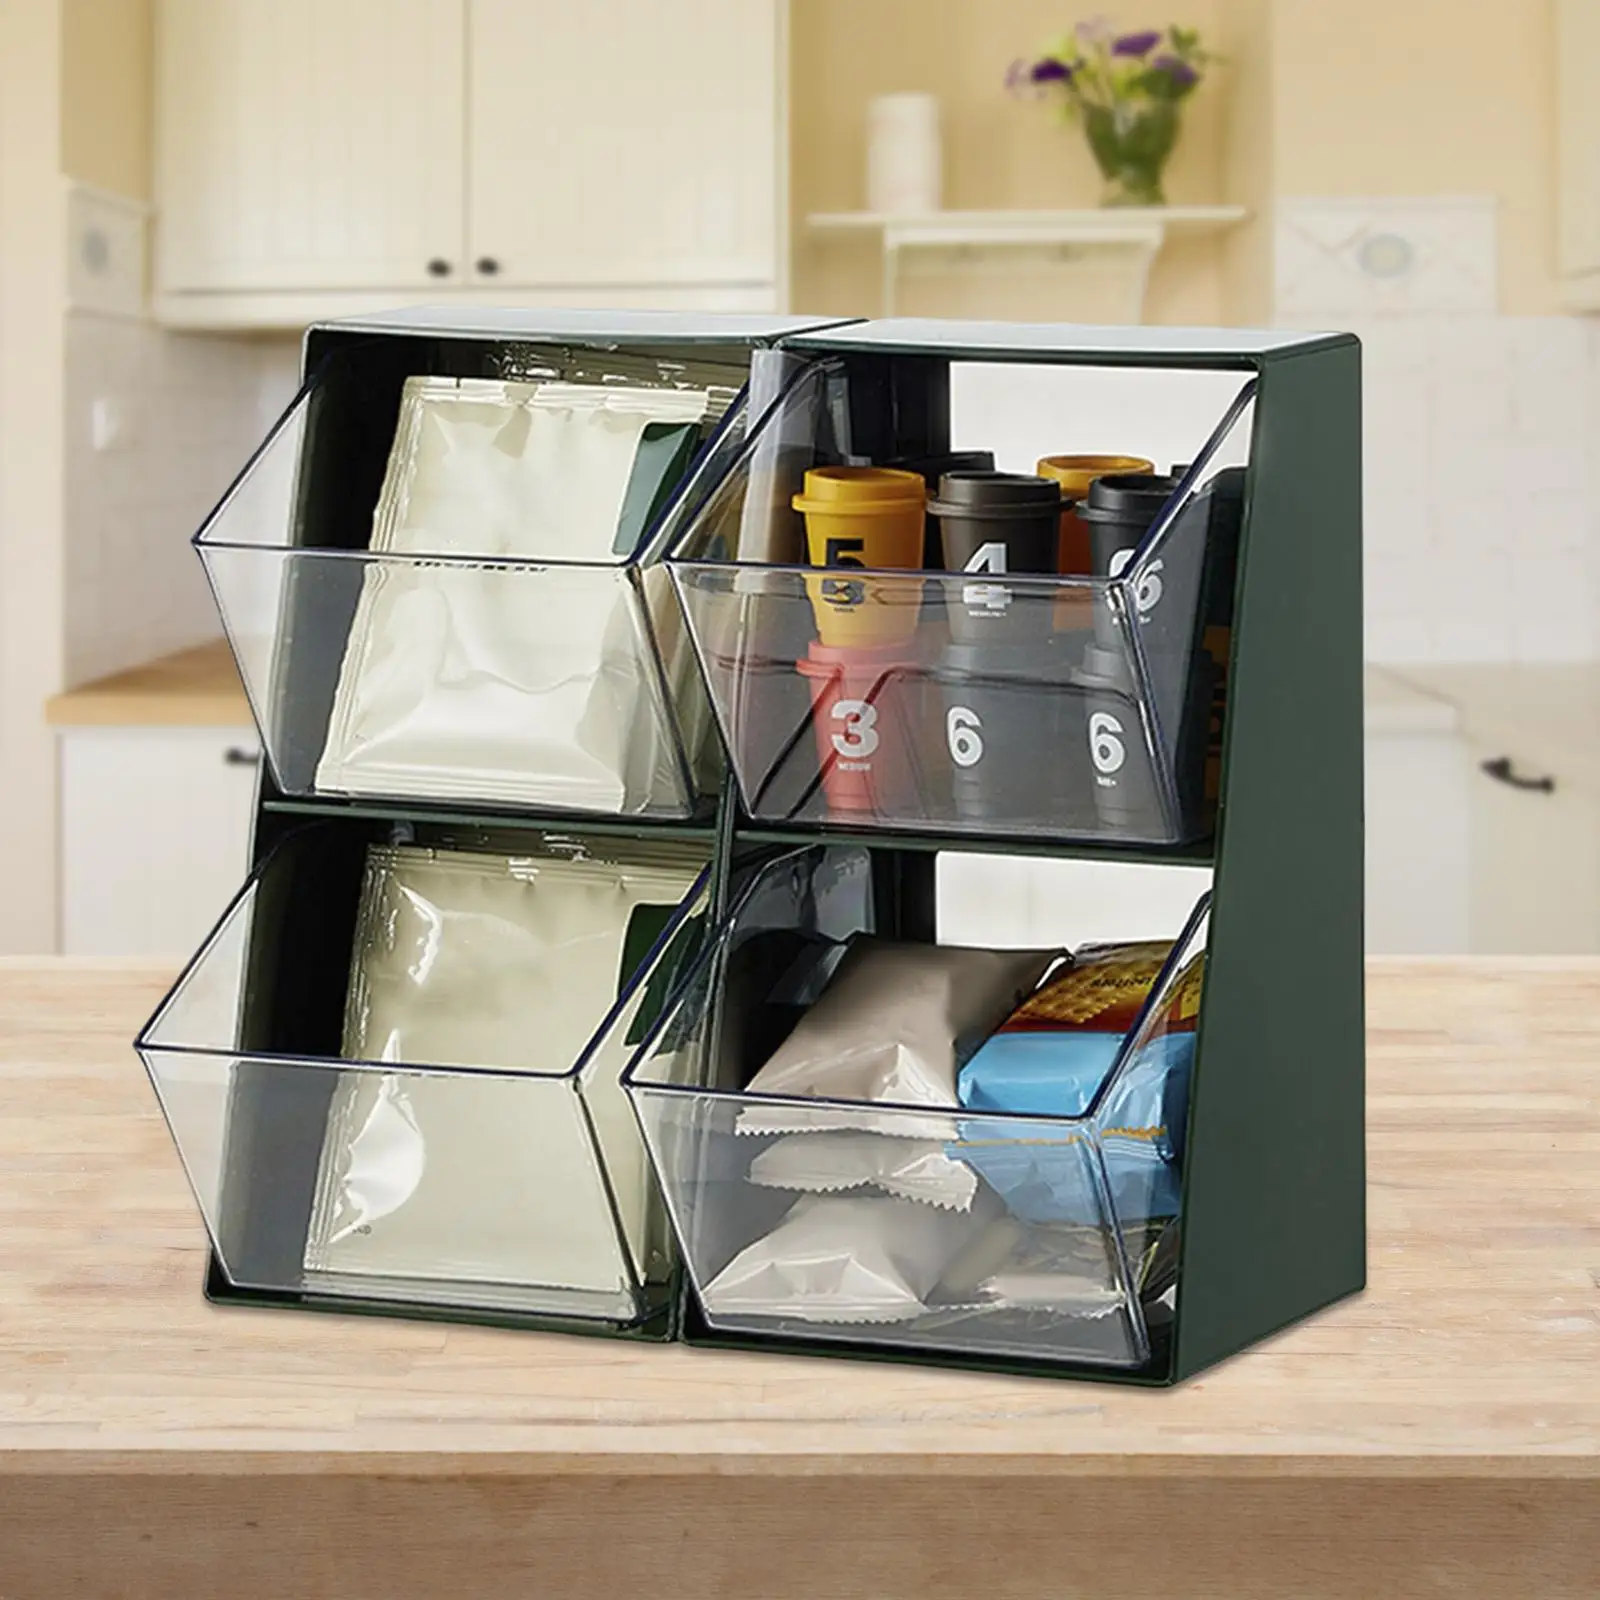 Clear Tea Box Storage Tea Holder Rack for Spices Sugar Packets Home Office